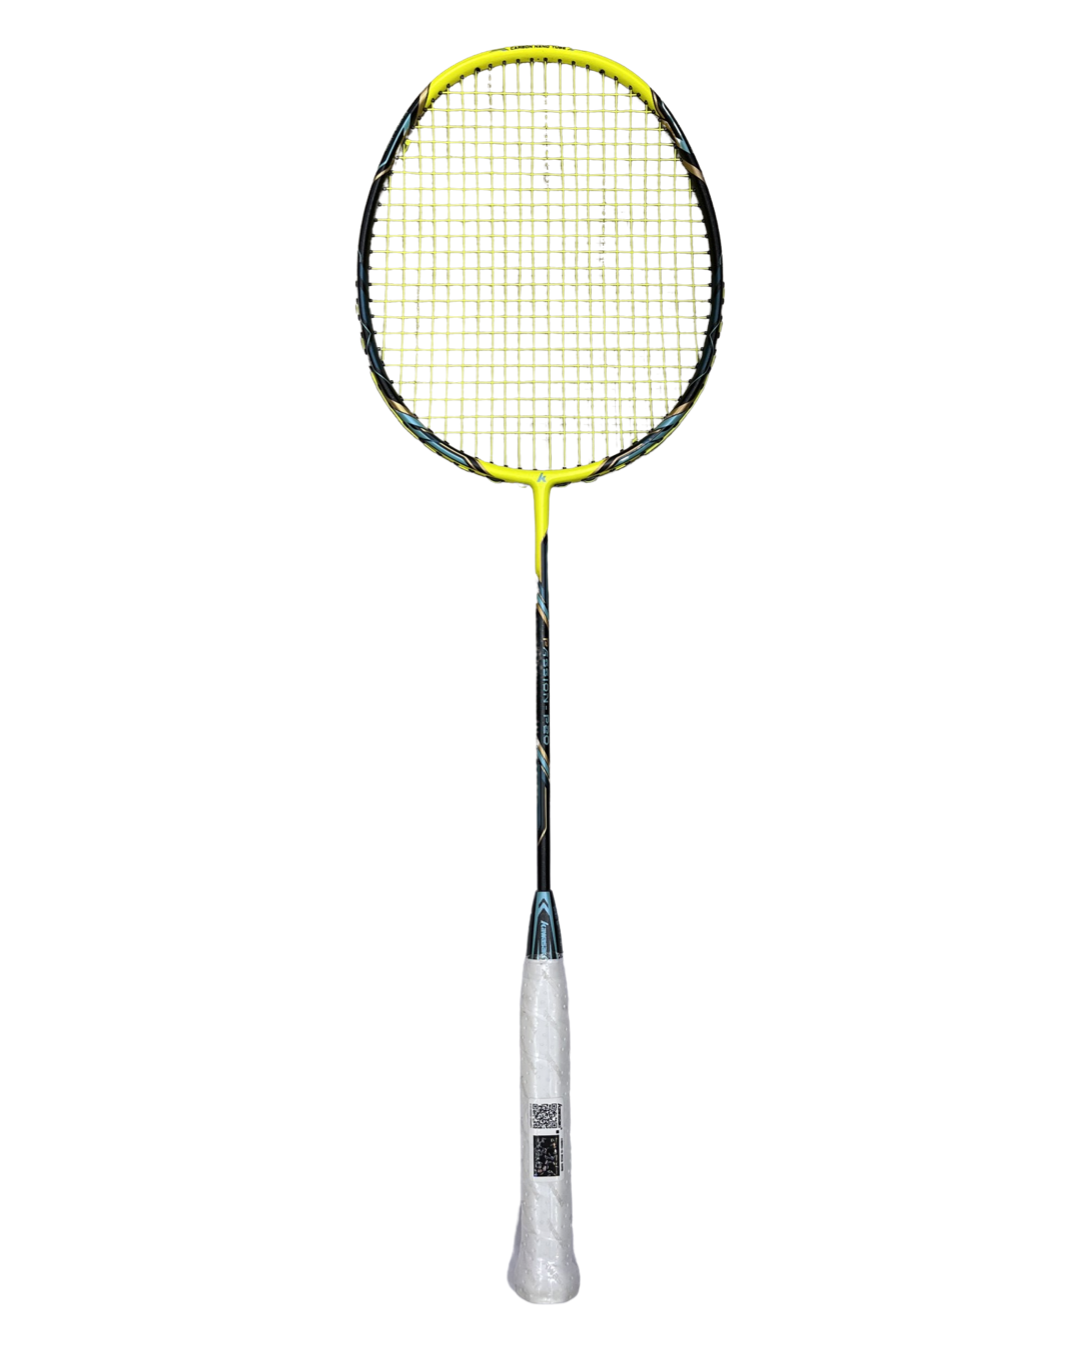 Buy Kawasaki Racket Sports at Best Prices Online in Nepal